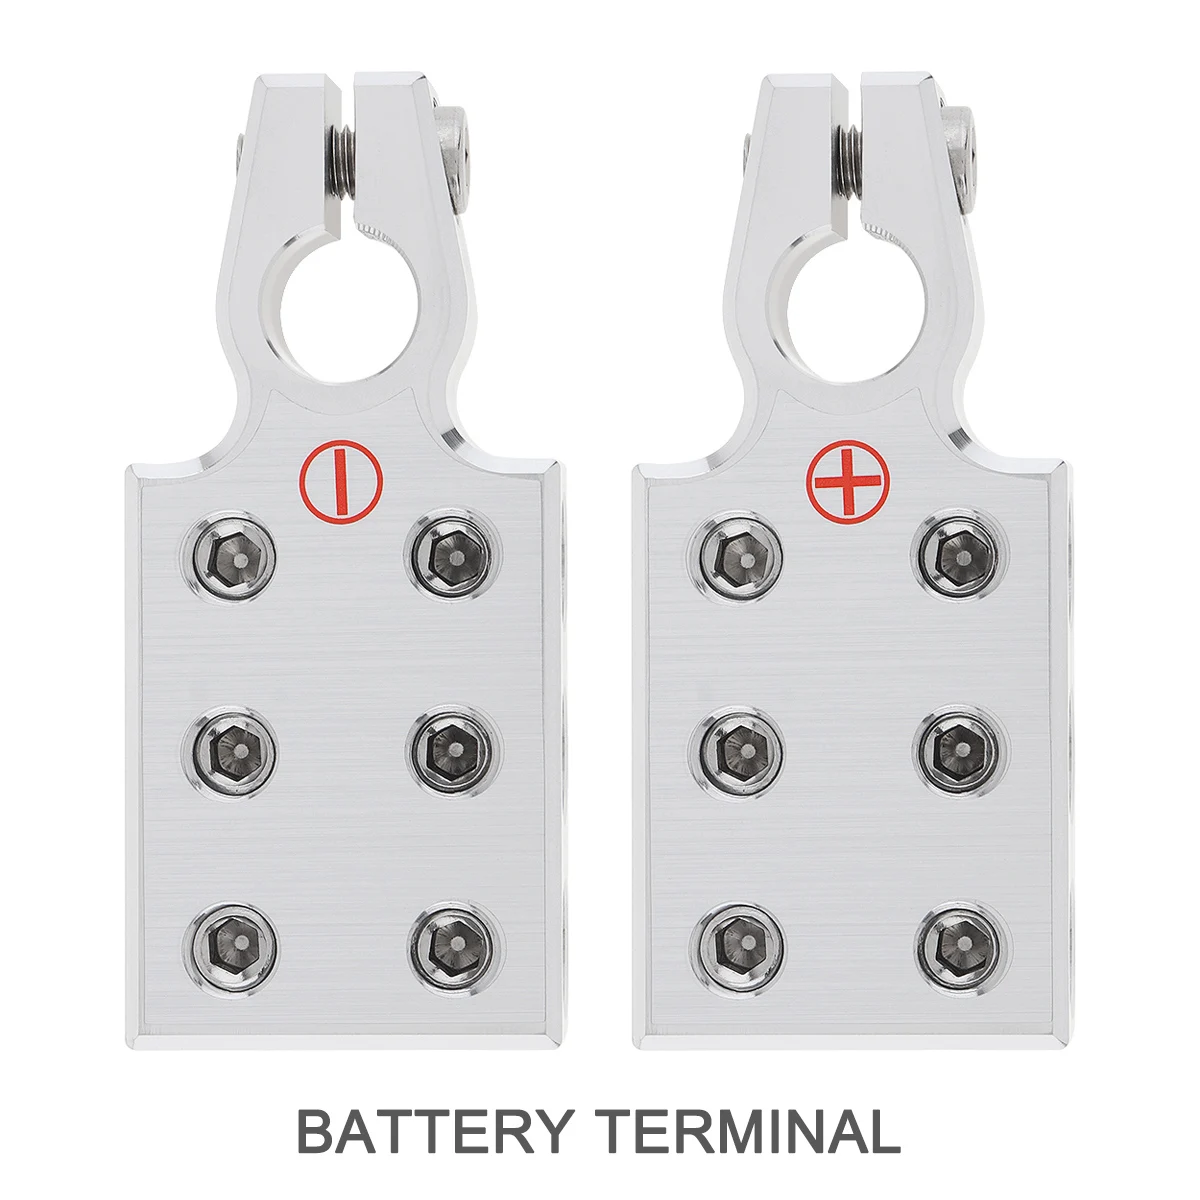 

6 x1/ 0 Gauge AWG Lead-Acid Battery Terminals Clamp - Positive and Negative (+/-) (Pair) for Tapered Top Post for Car / Trucks